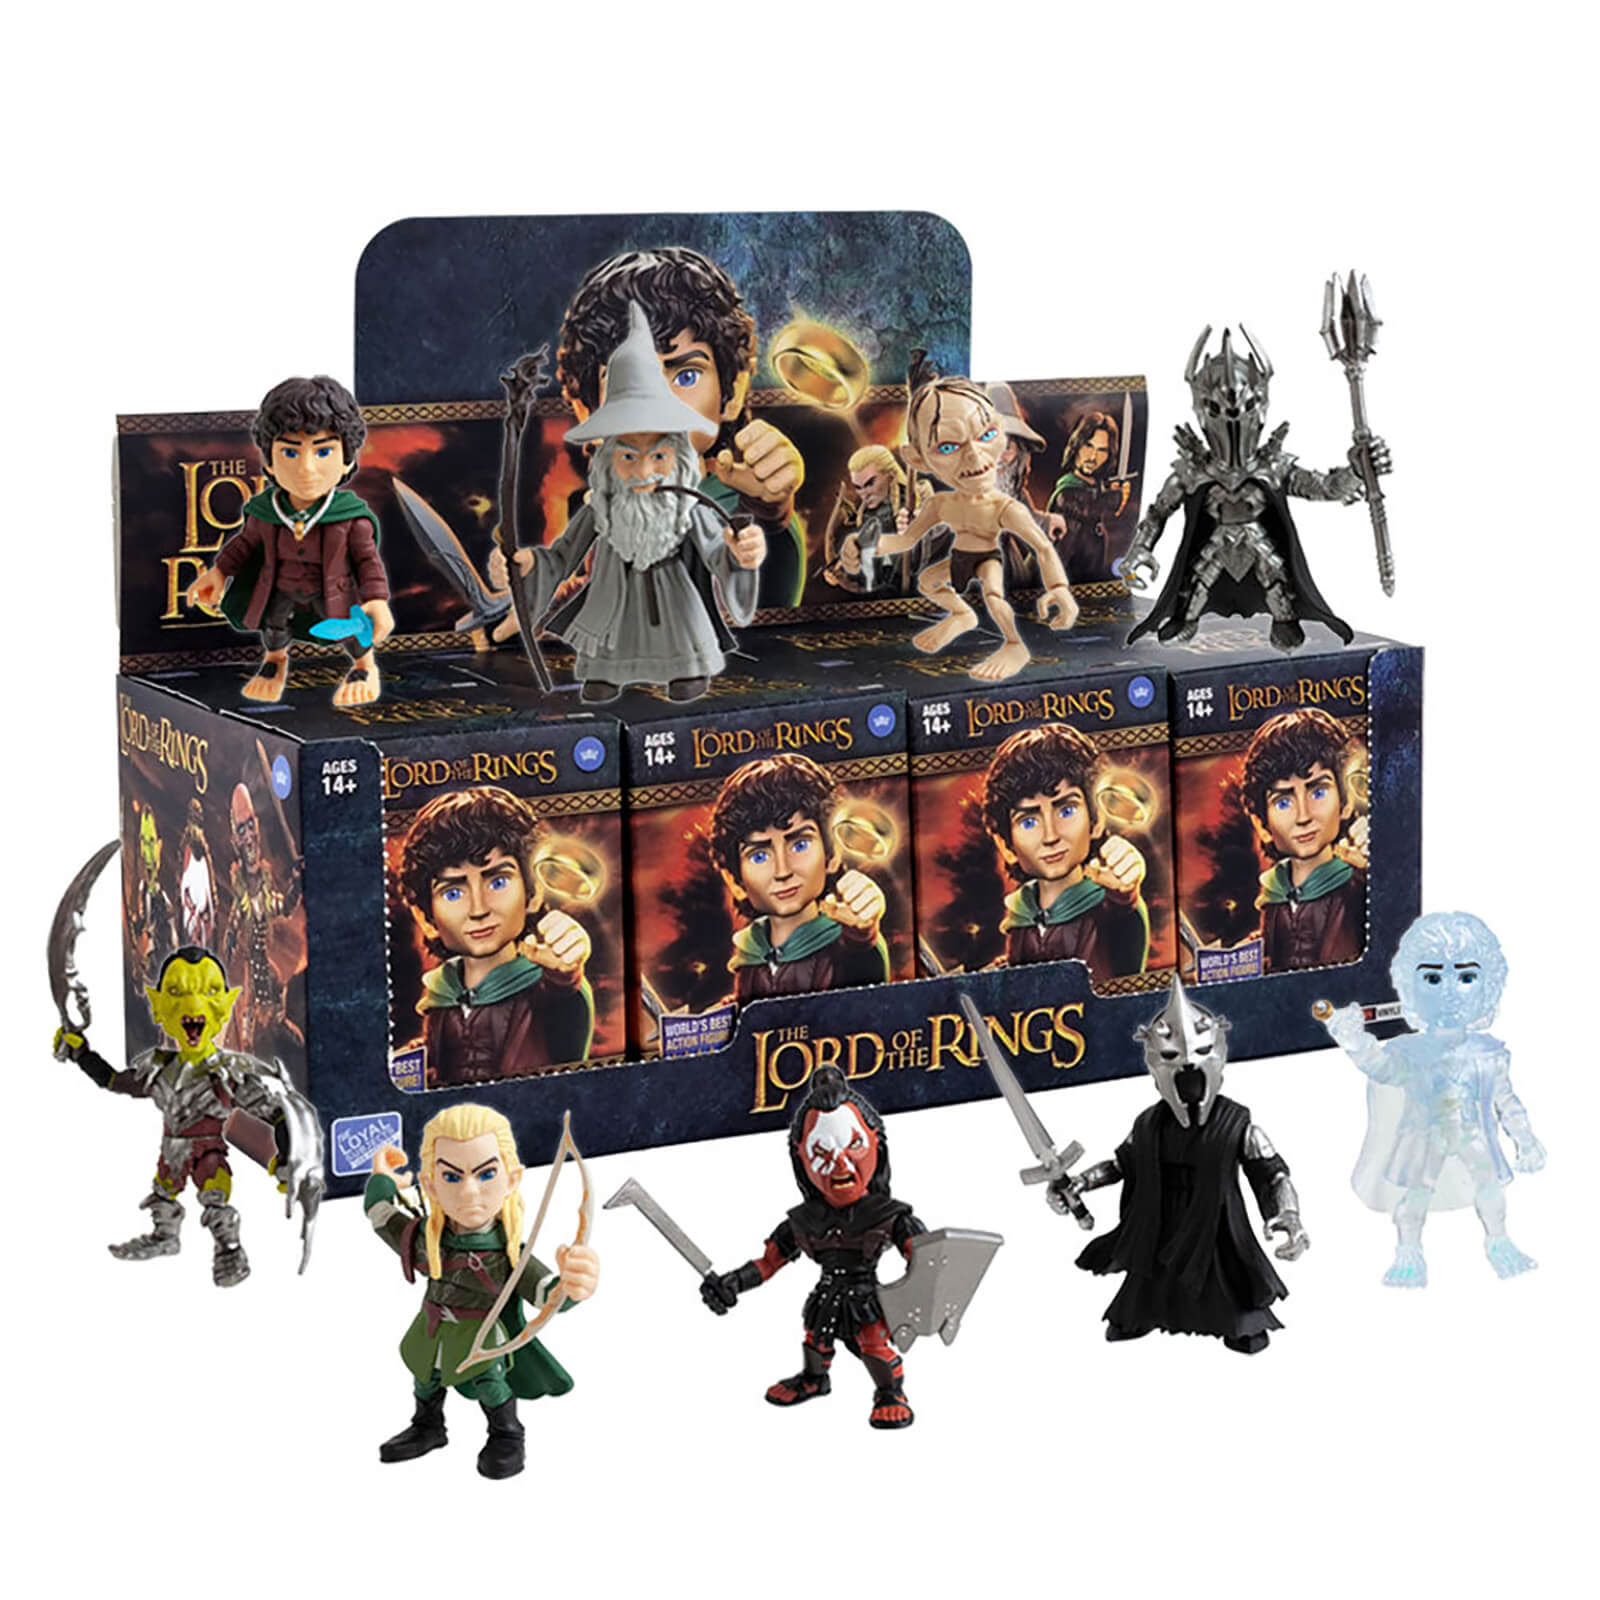 Photos - Action Figures / Transformers Loyal Subjects Lord of the Rings - Blind Box Action Fig PDQ - 8 Figures In